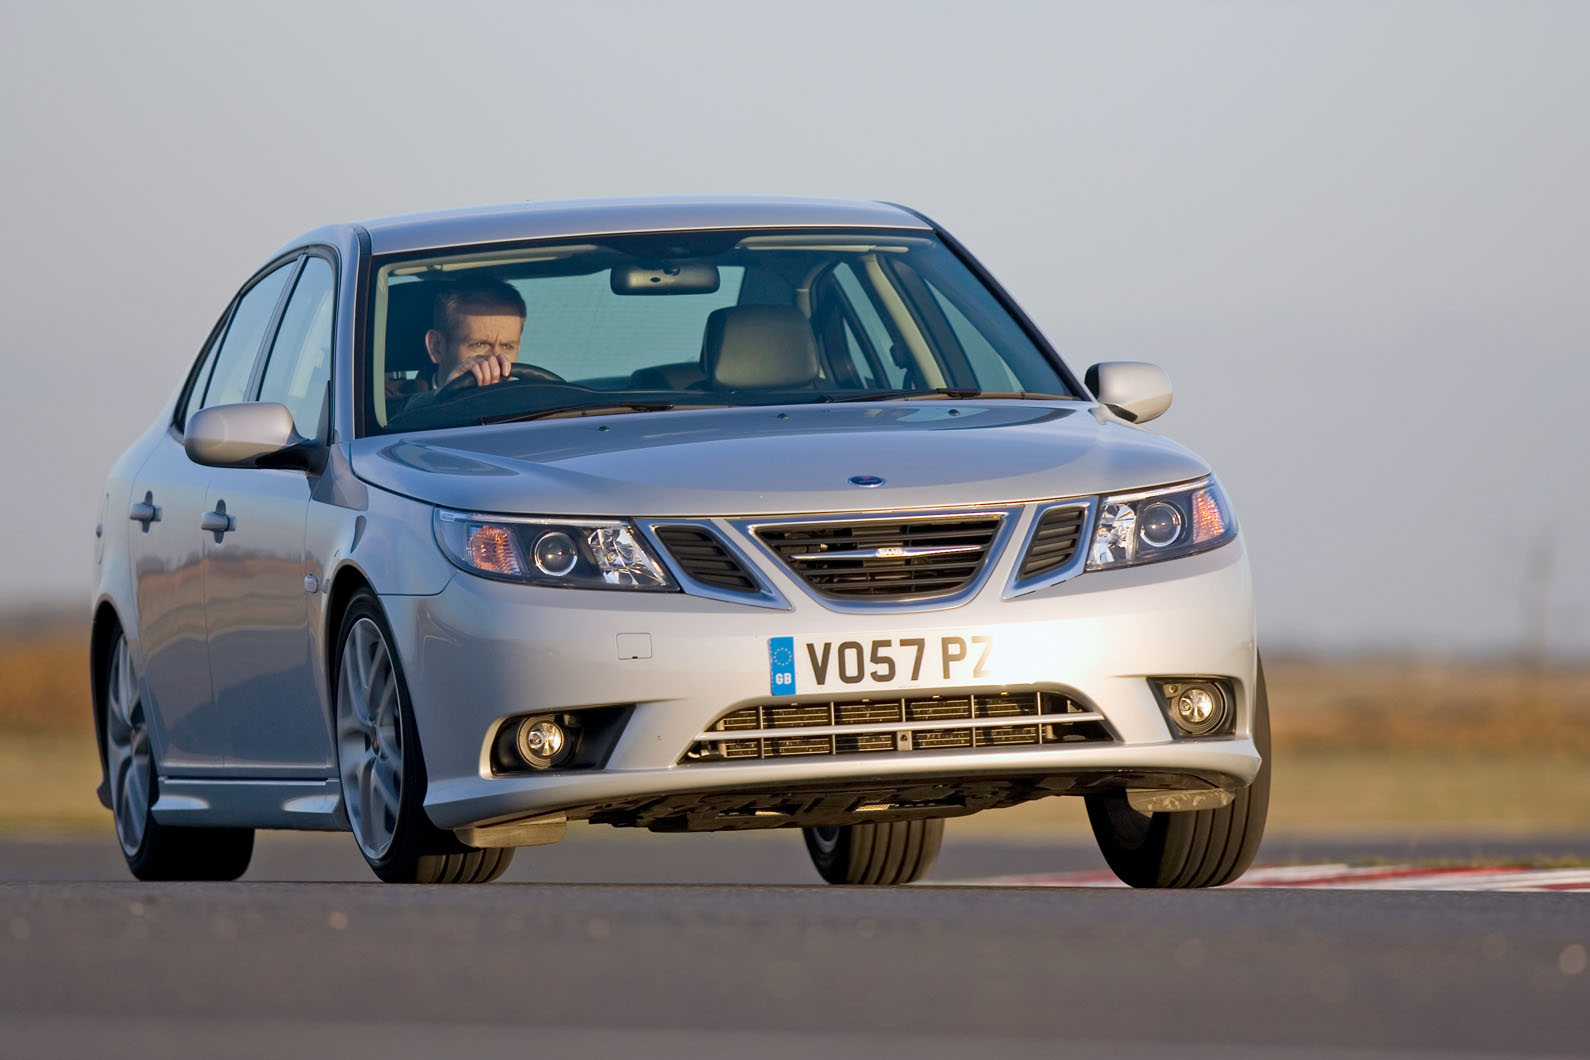 Complete Guide to Saab 9-3 Suspension, Brakes & Upgrades